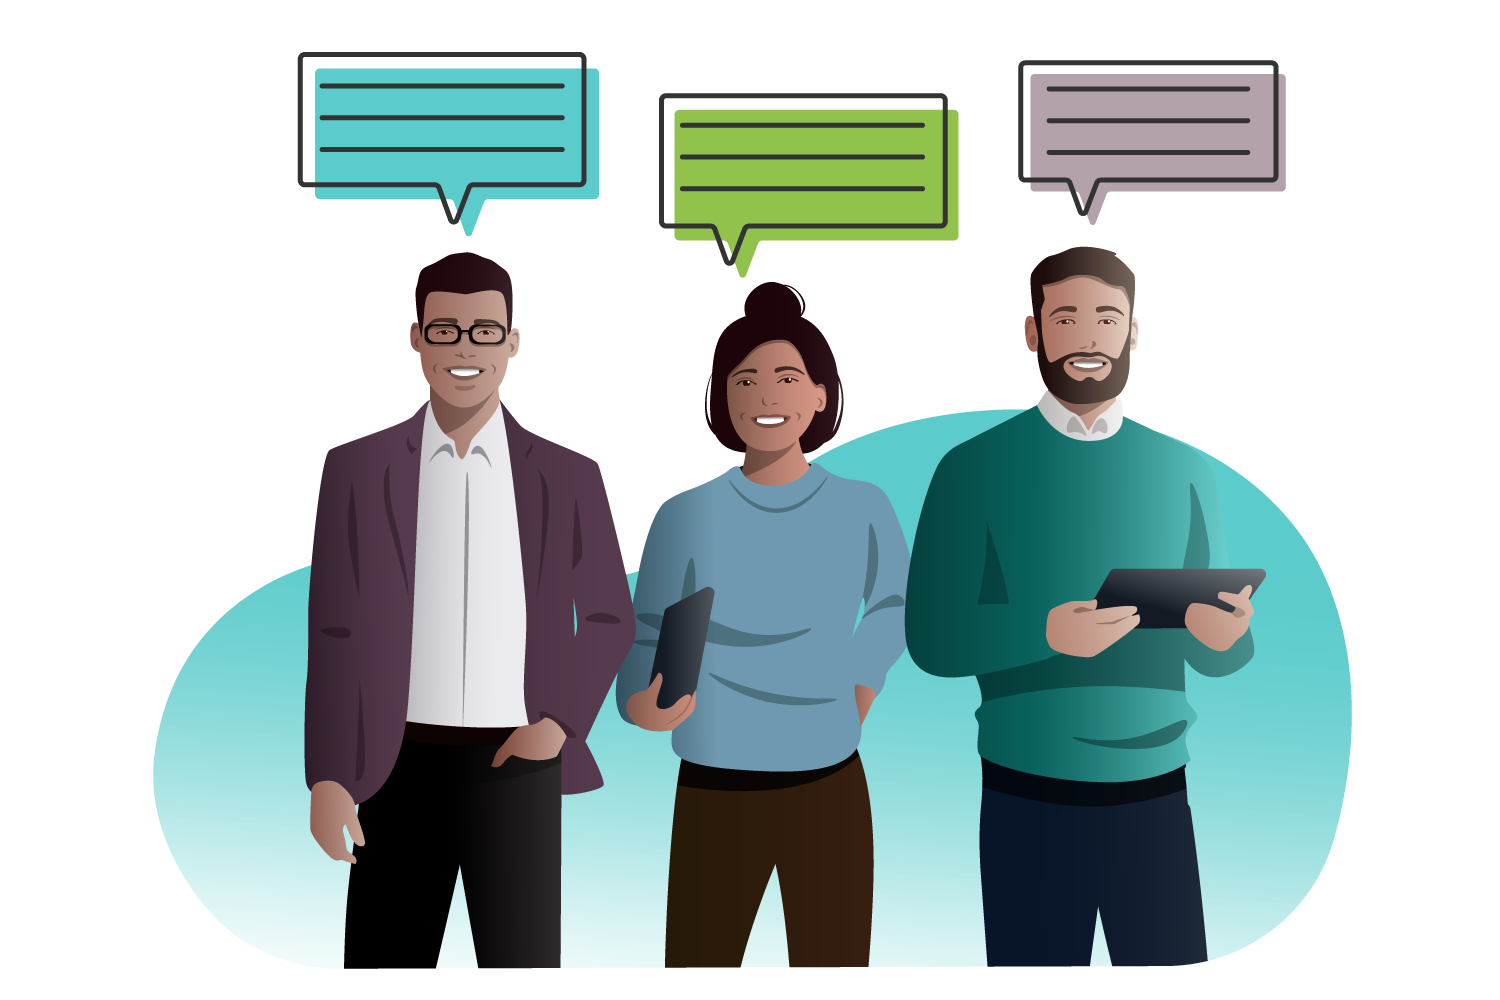 LodgeLink customer service representatives with speech bubbles standing next to each other.	